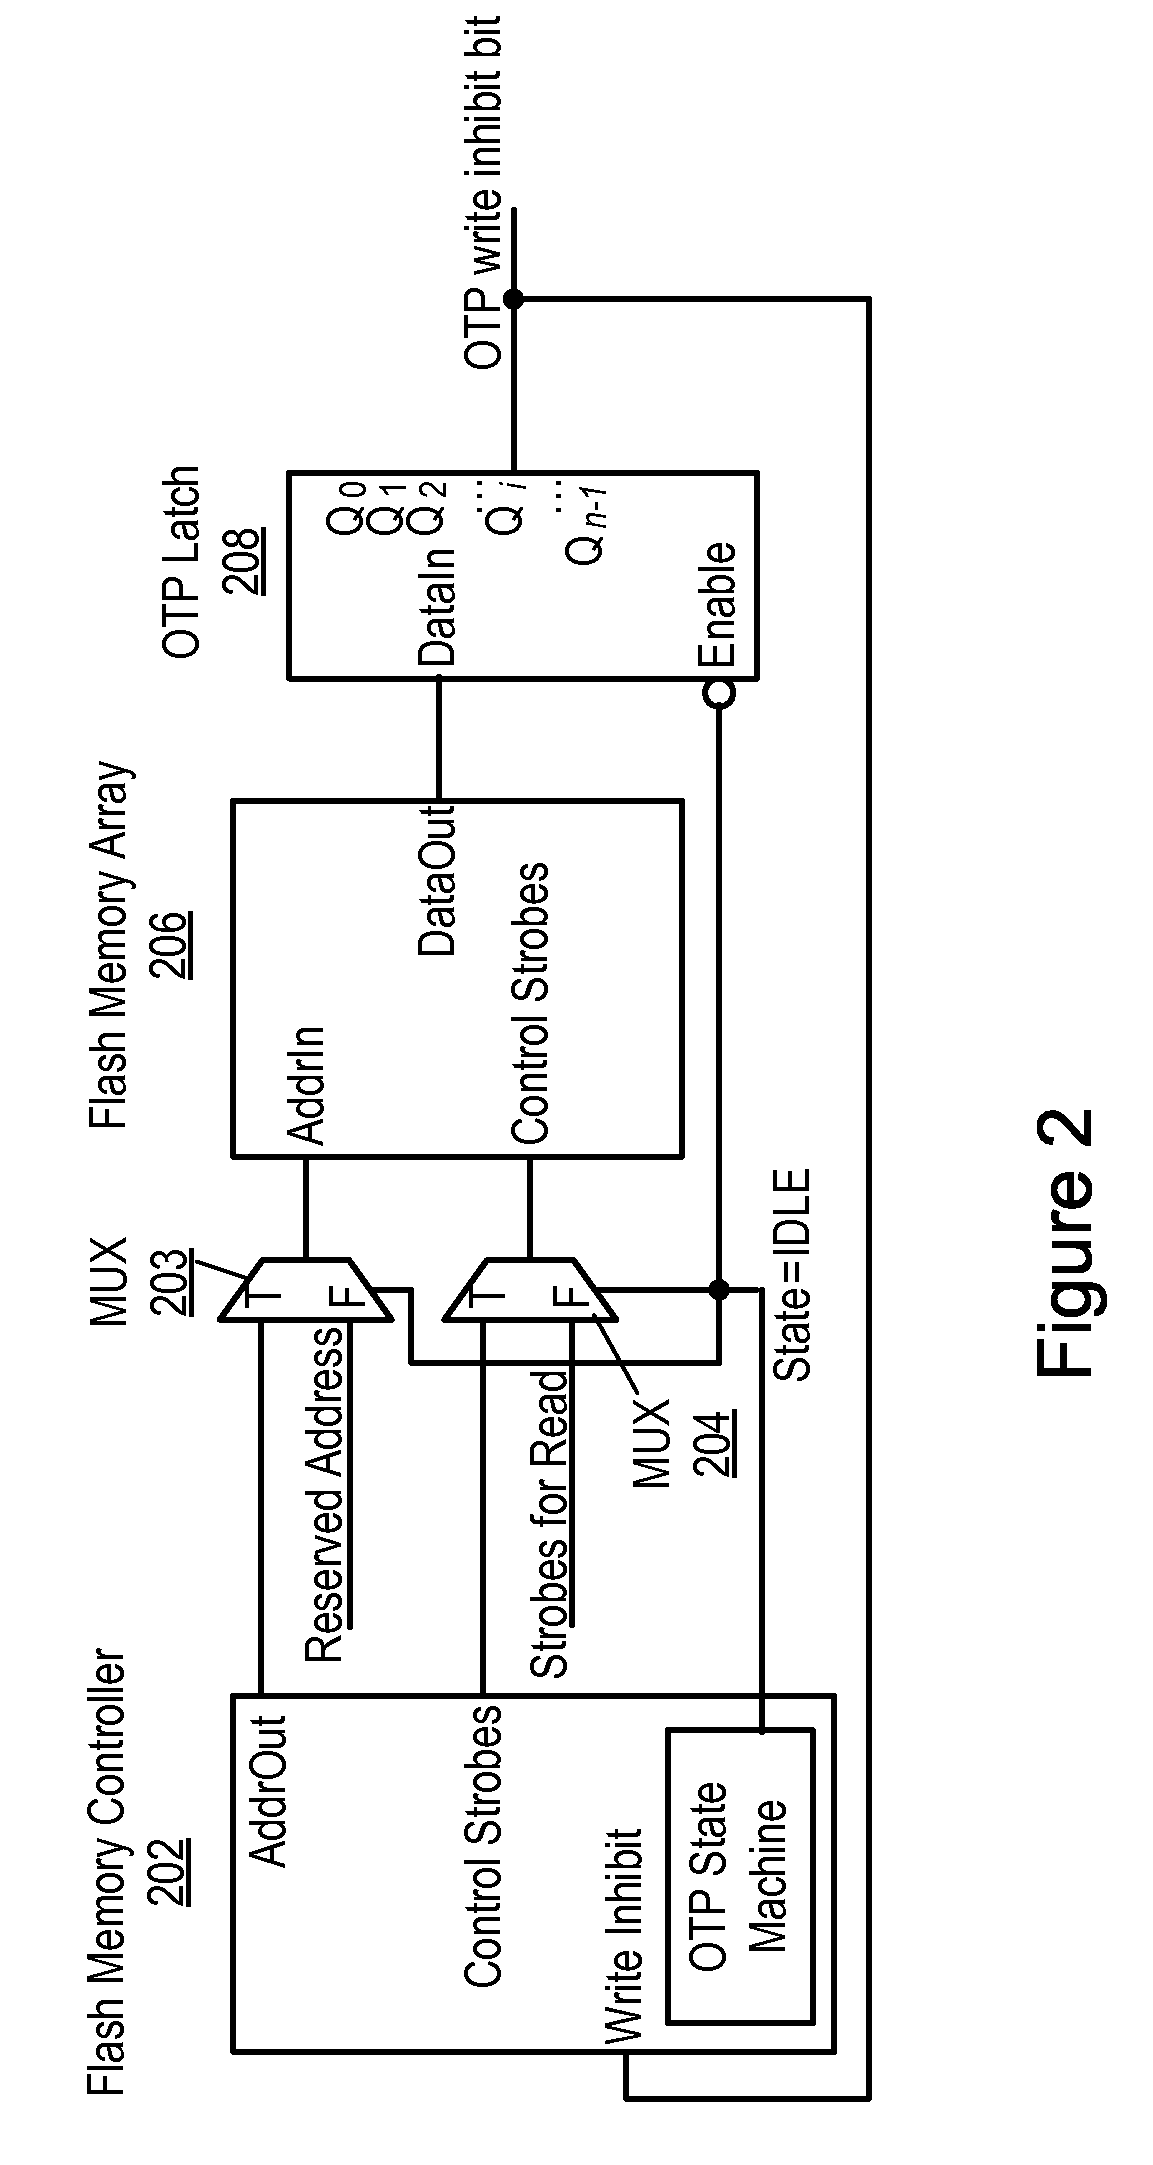 Implementation of One Time Programmable Memory with Embedded Flash Memory in a System-on-Chip